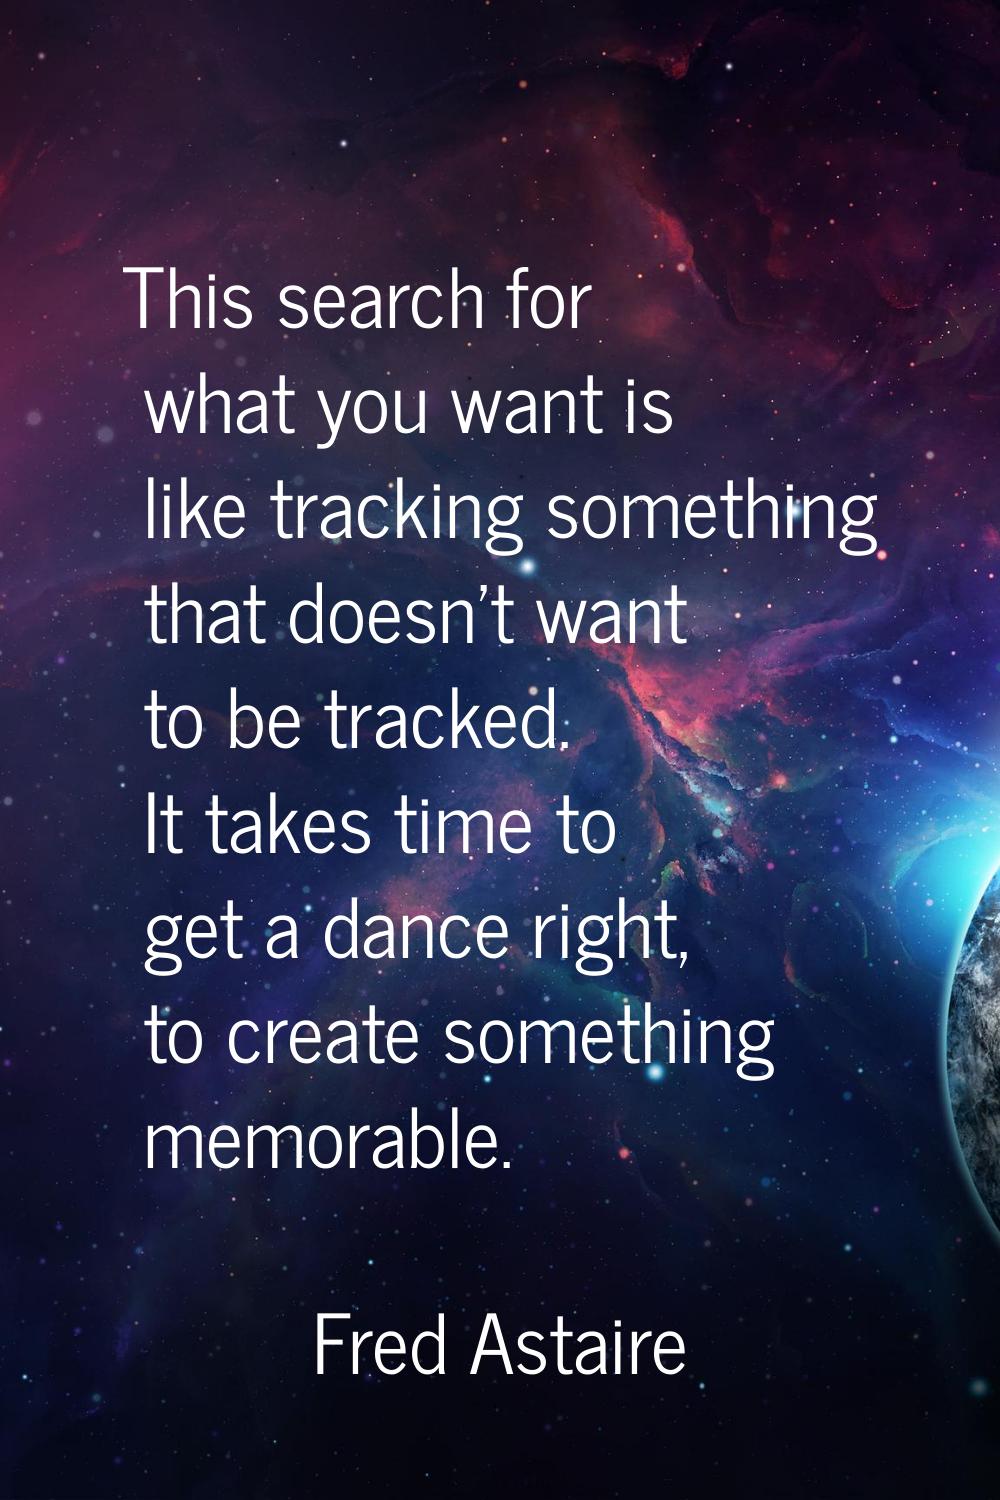 This search for what you want is like tracking something that doesn't want to be tracked. It takes 